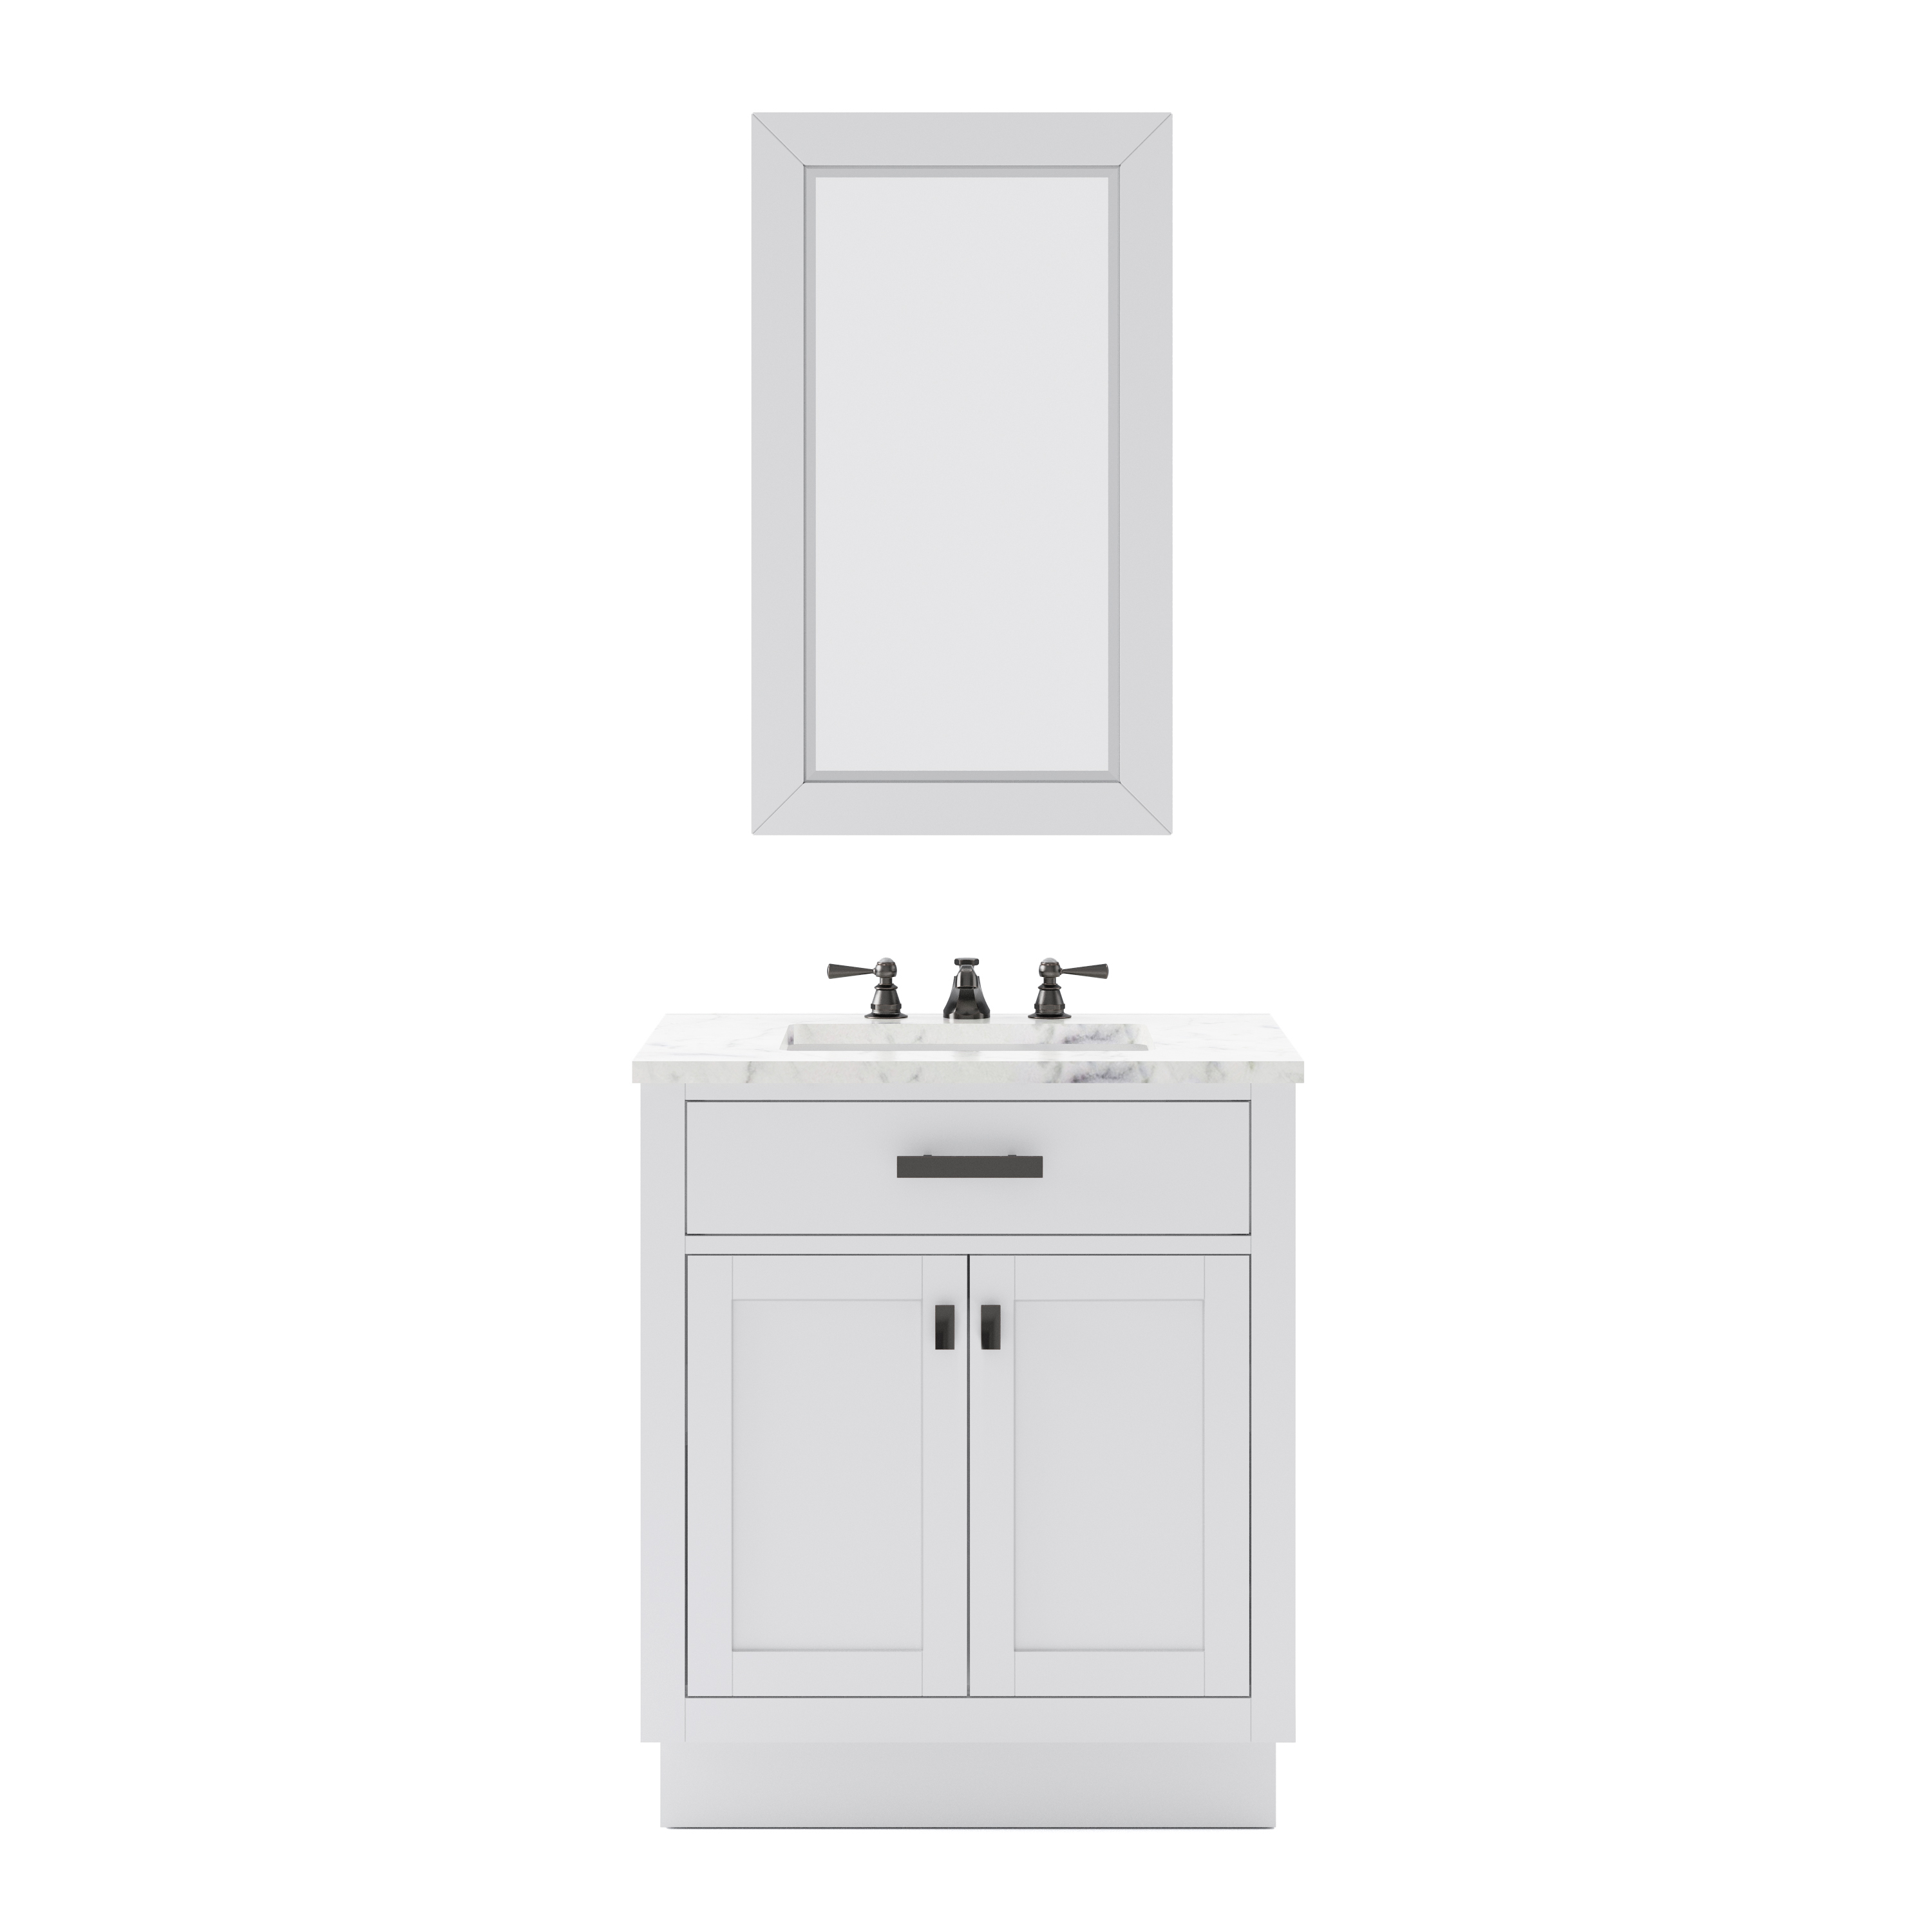 30" Single Sink Carrara White Marble Countertop Bath Vanity in Pure White with Faucet and Mirror Options